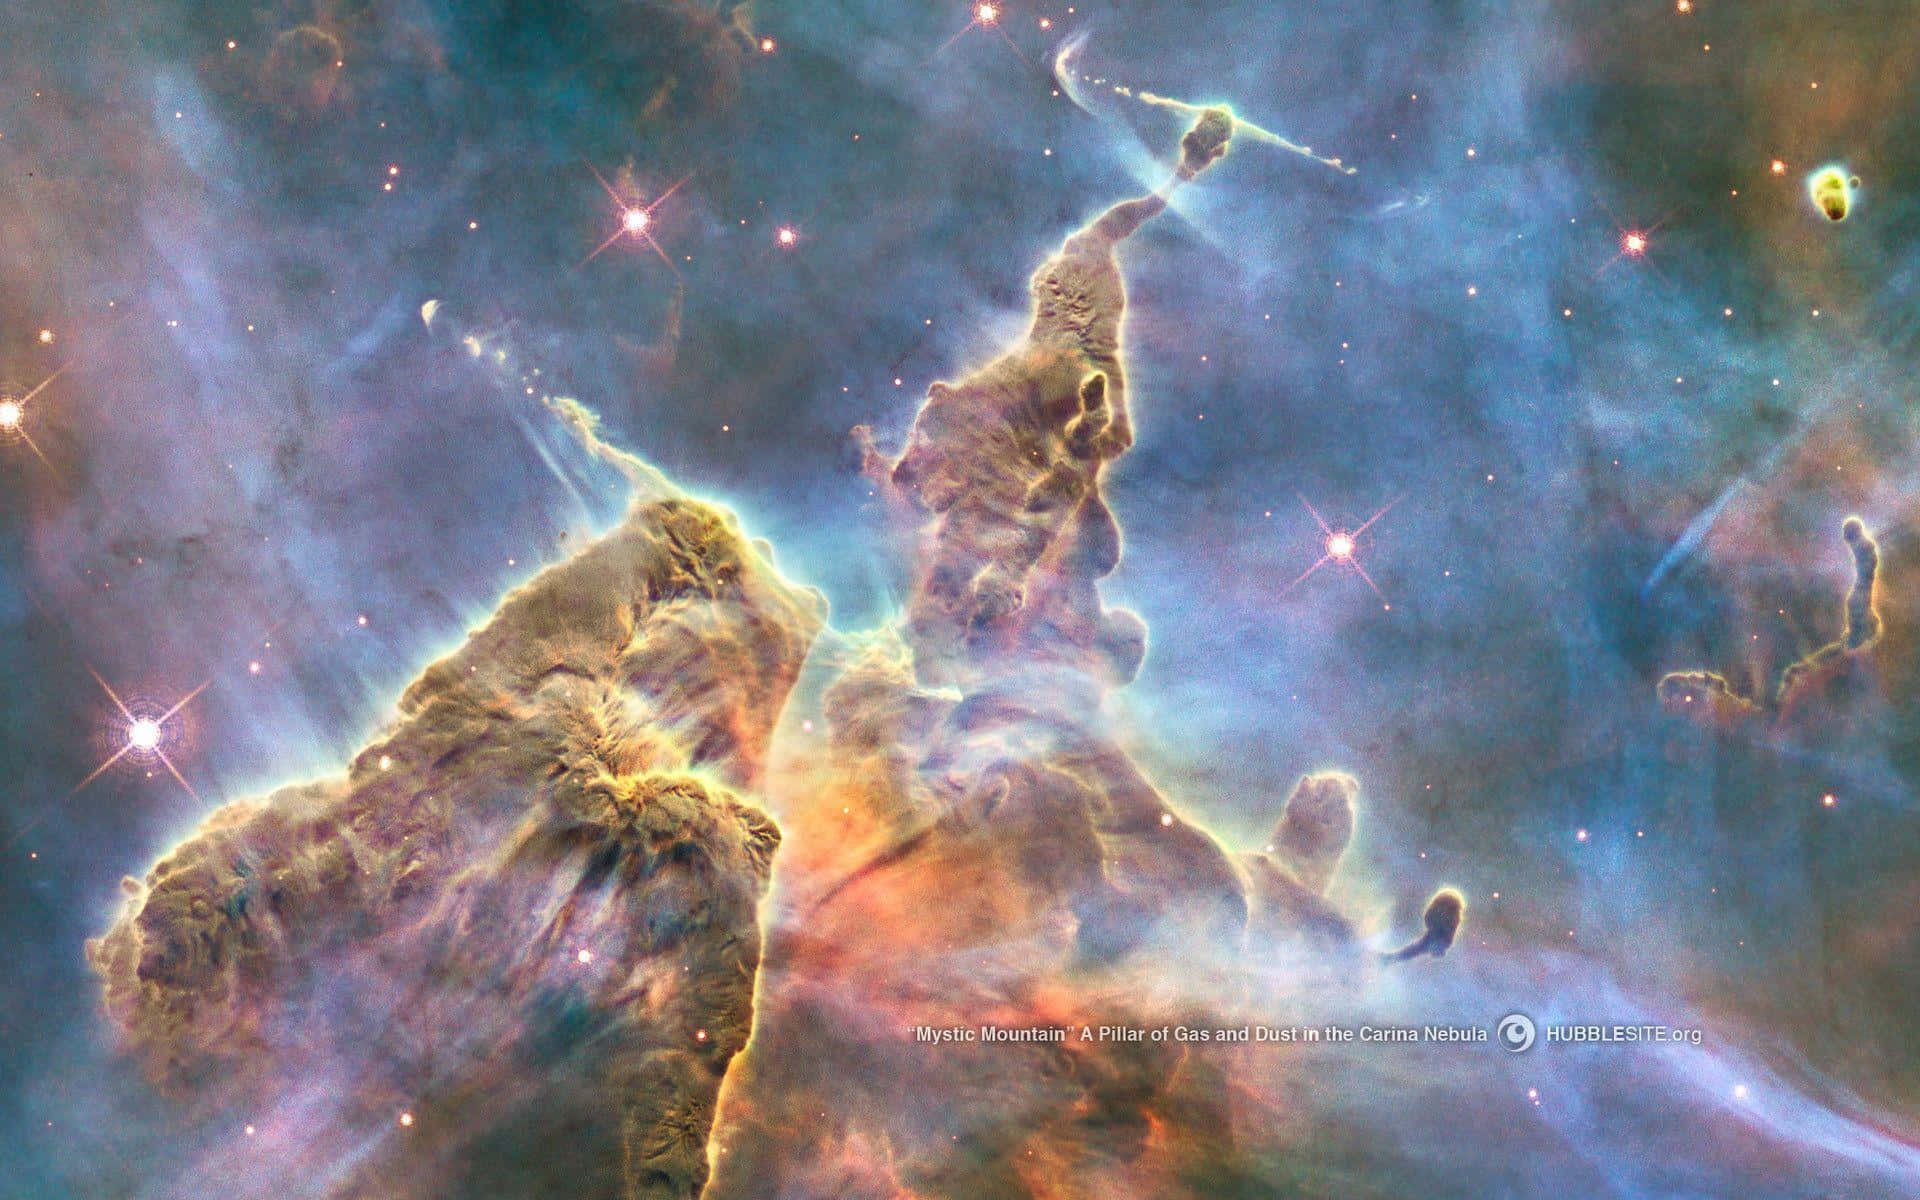 The Stunning Wonders of the Universe as Seen Through the Hubble 4K Telescope Wallpaper